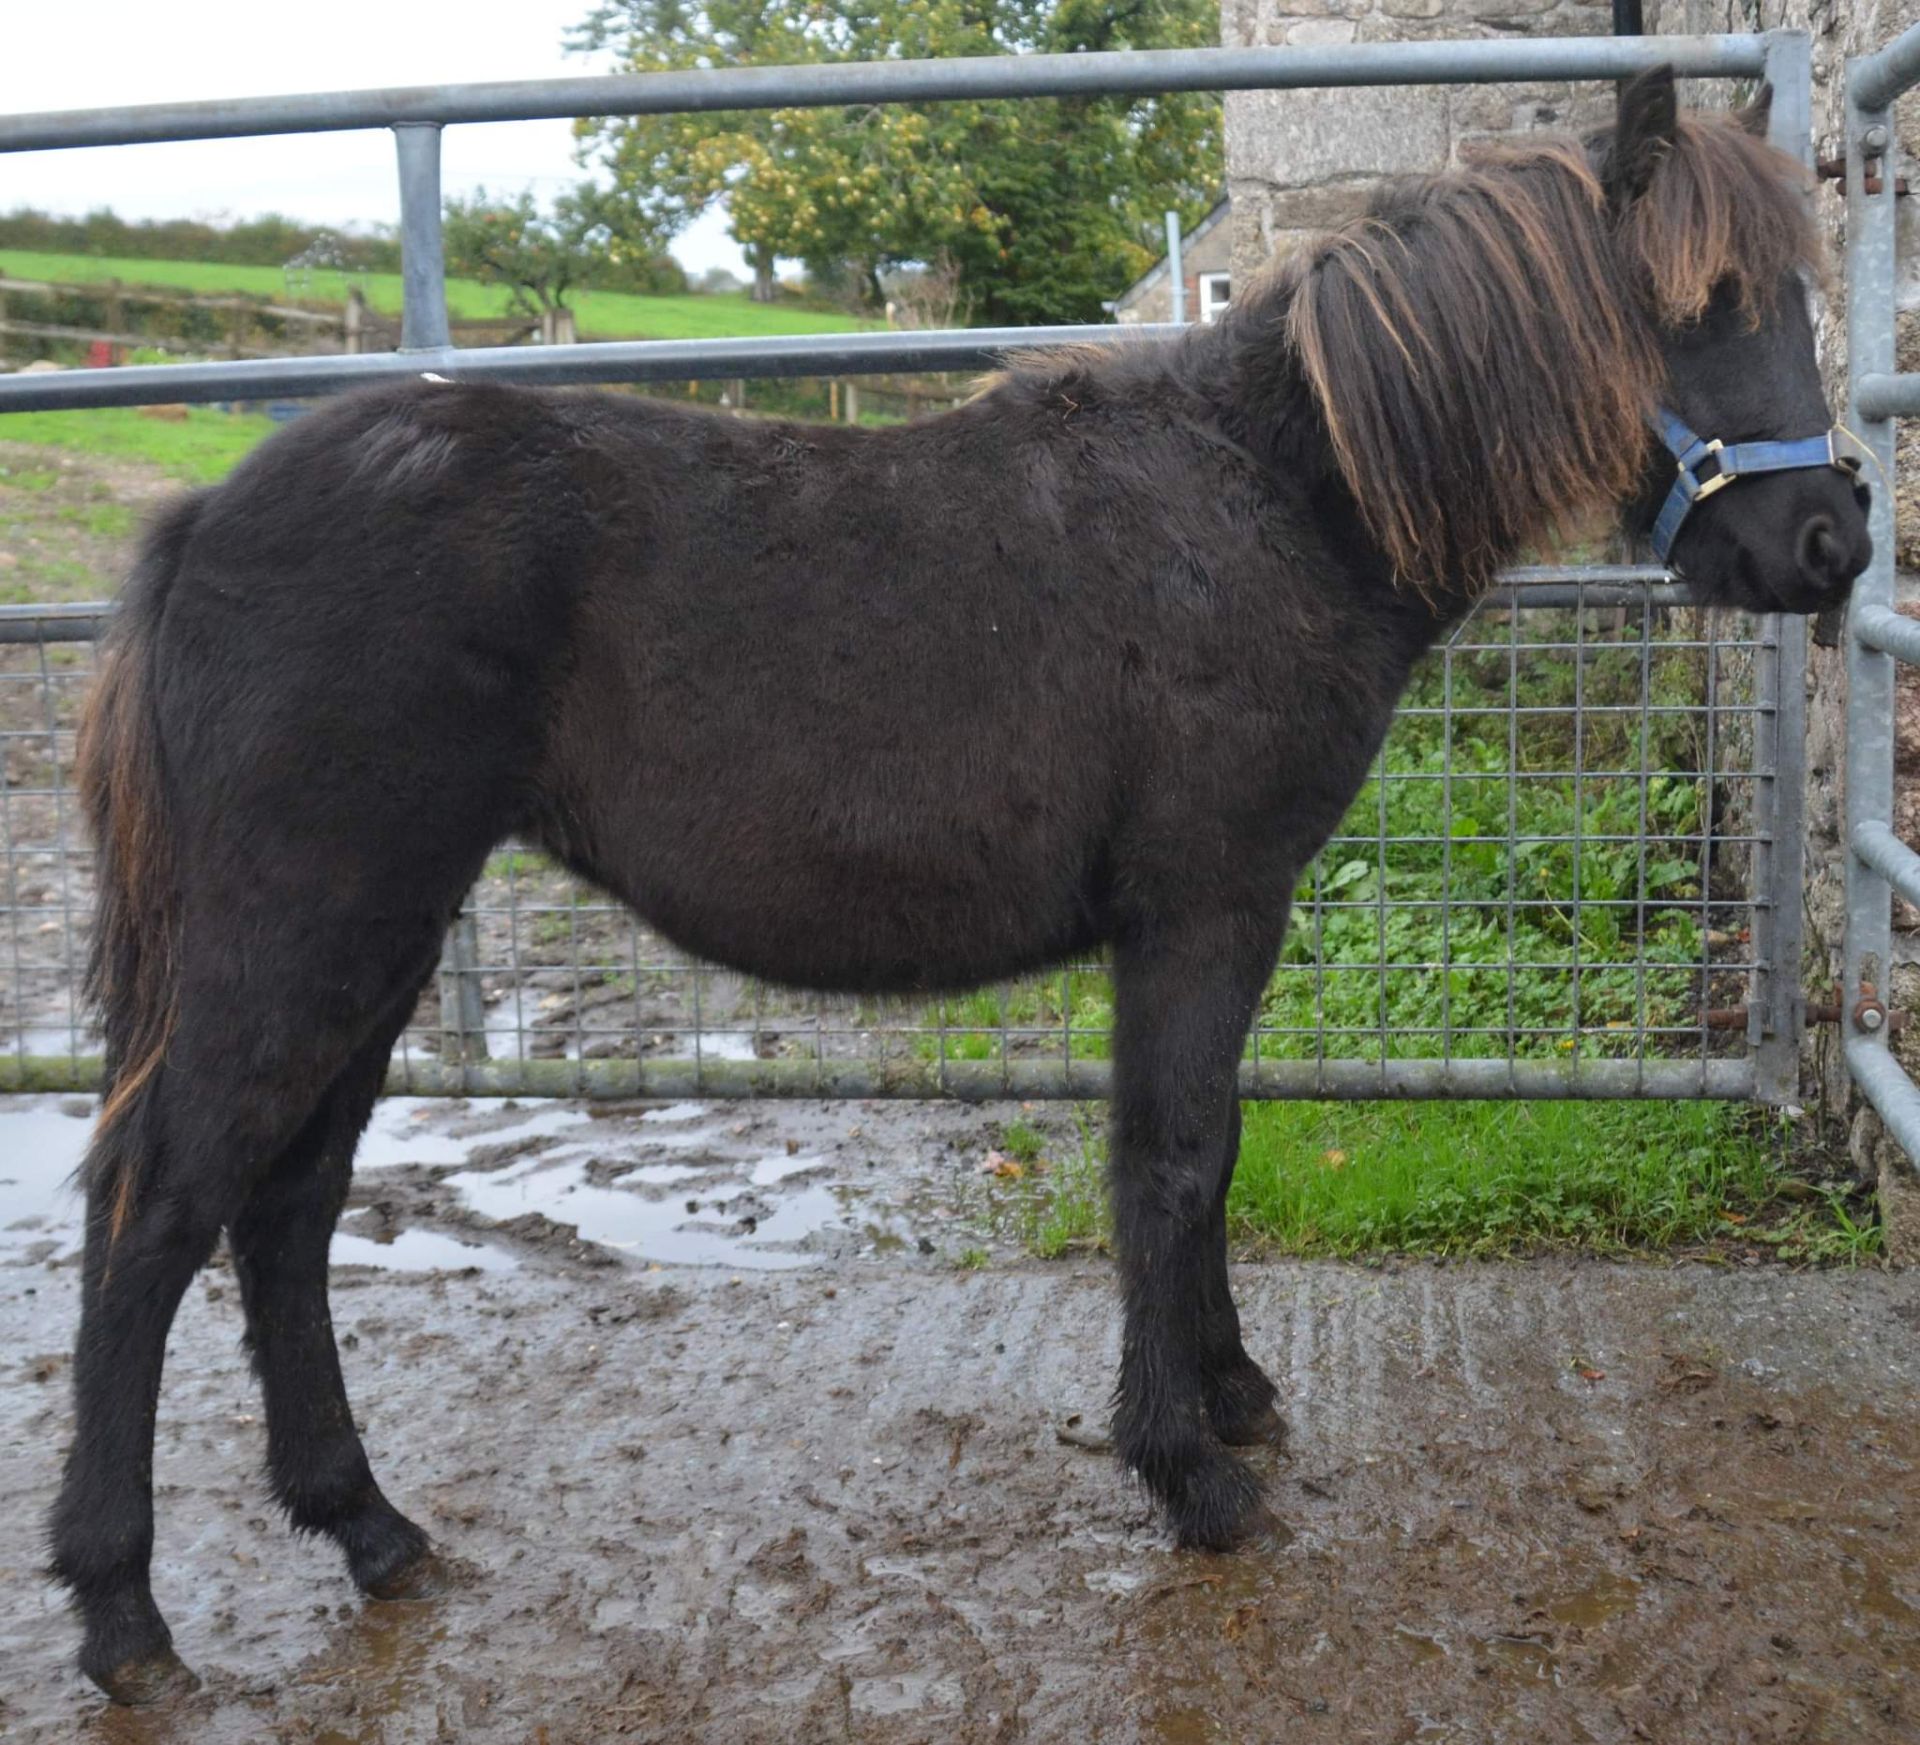 'BLACKATOR LILLIBET' DARTMOOR HILL PONY BLACK FILLY APPROX 7 MONTHS OLD - Image 6 of 7